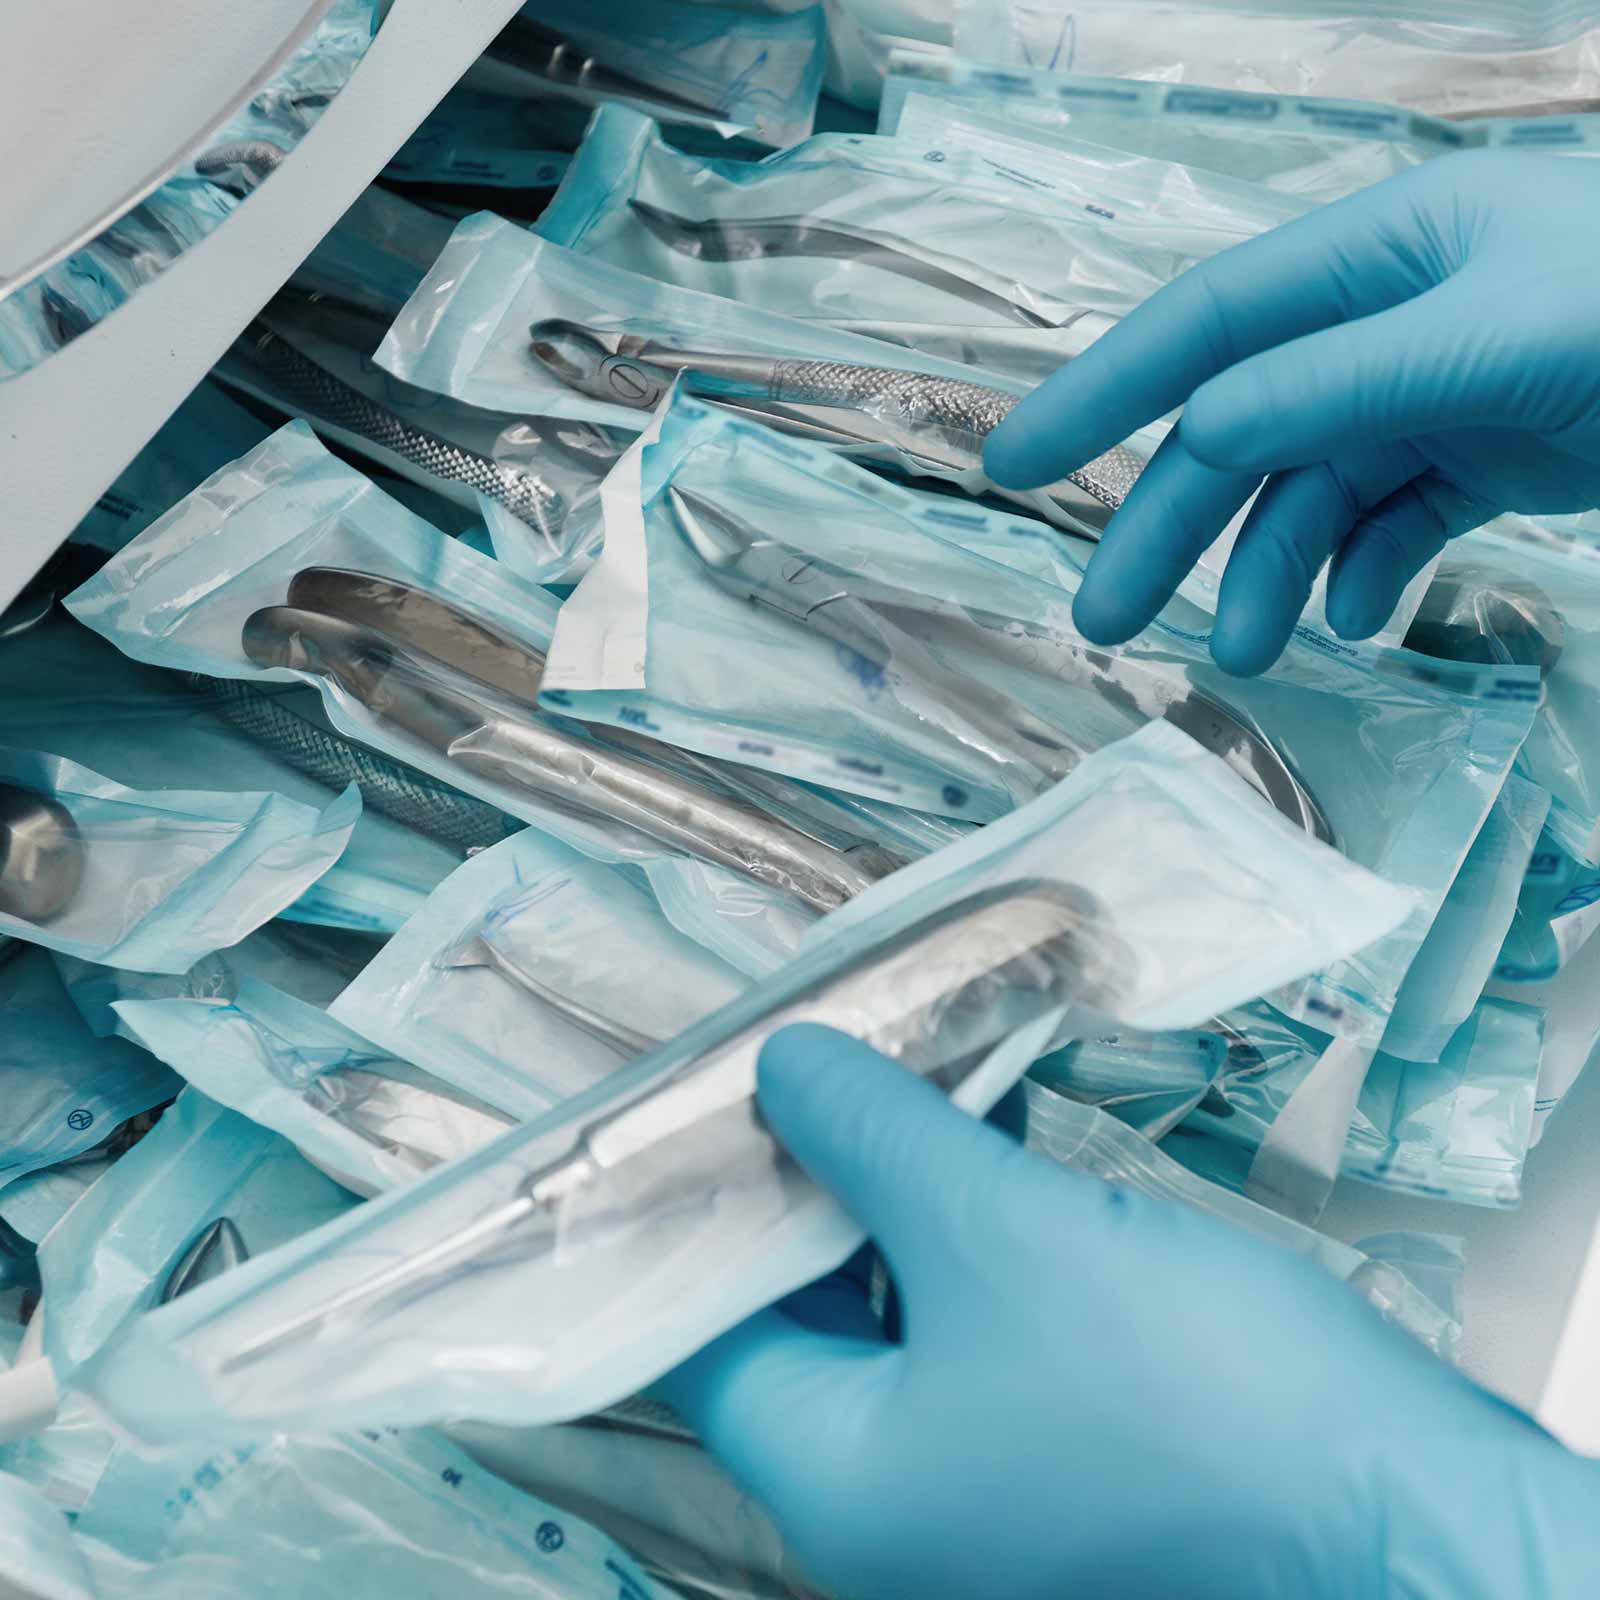 Sterile disposable medical instruments